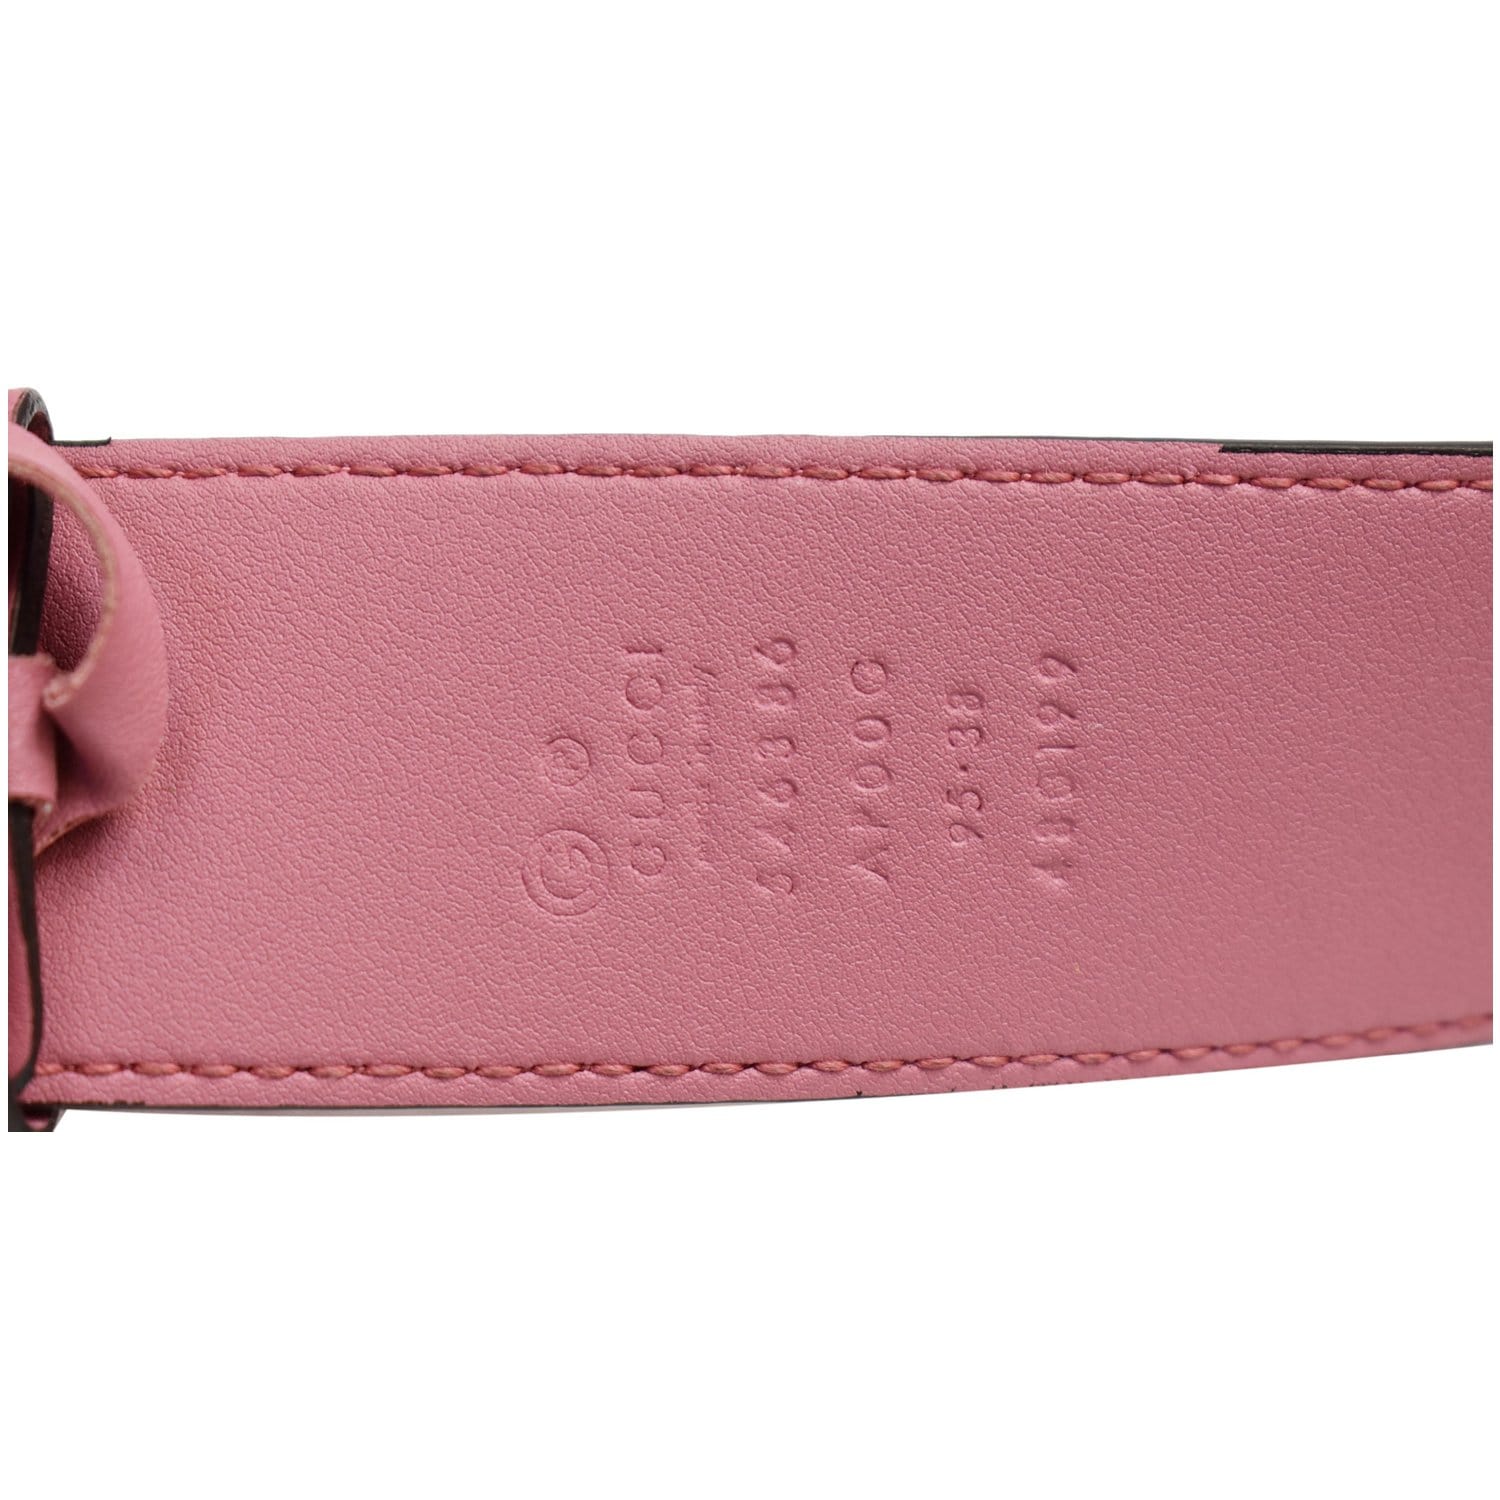 Gucci - Authenticated Interlocking Buckle Belt - Leather Pink Striped for Women, Very Good Condition